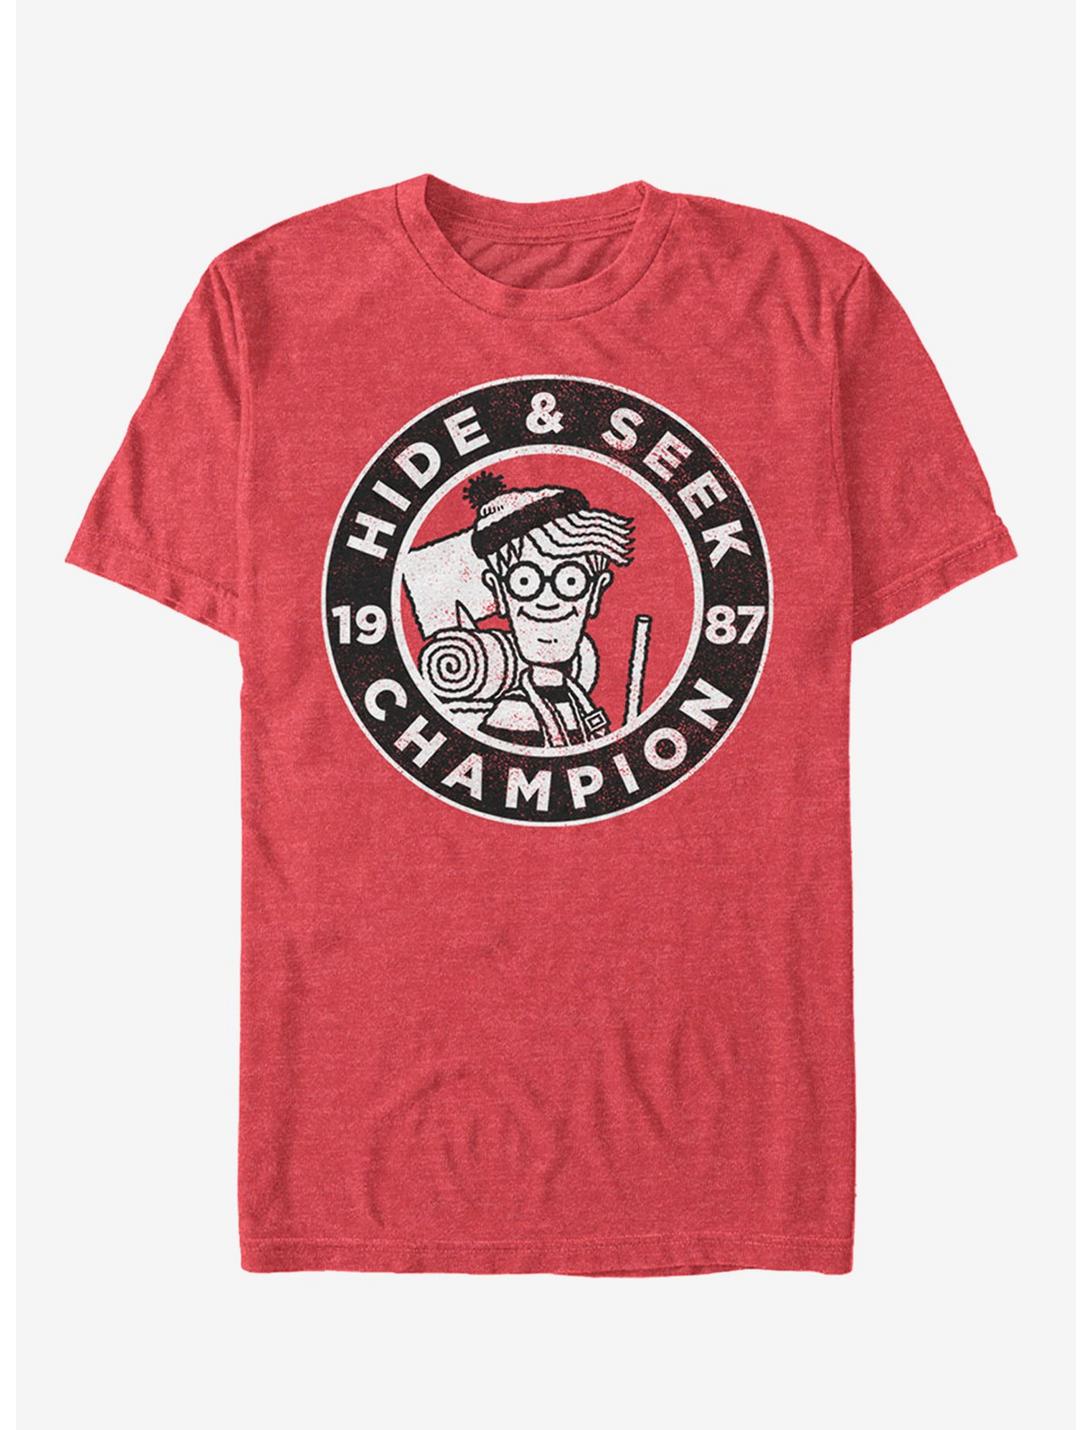 Where's Waldo Hide and Seek Champion T-Shirt, RED HTR, hi-res